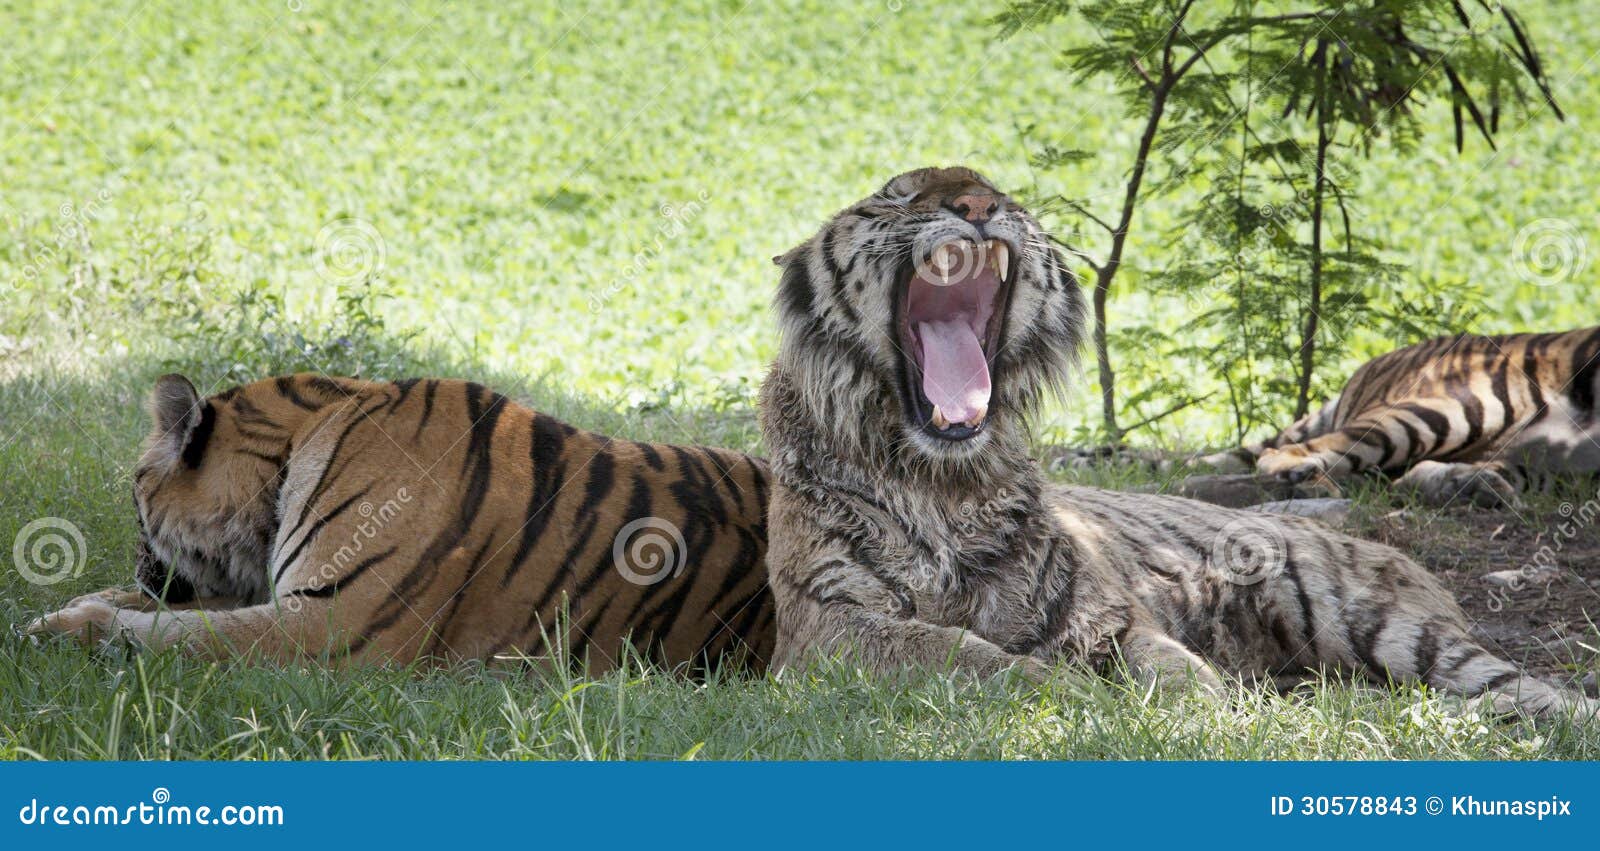 tiger lying on green grass and open mouth show killed teeth